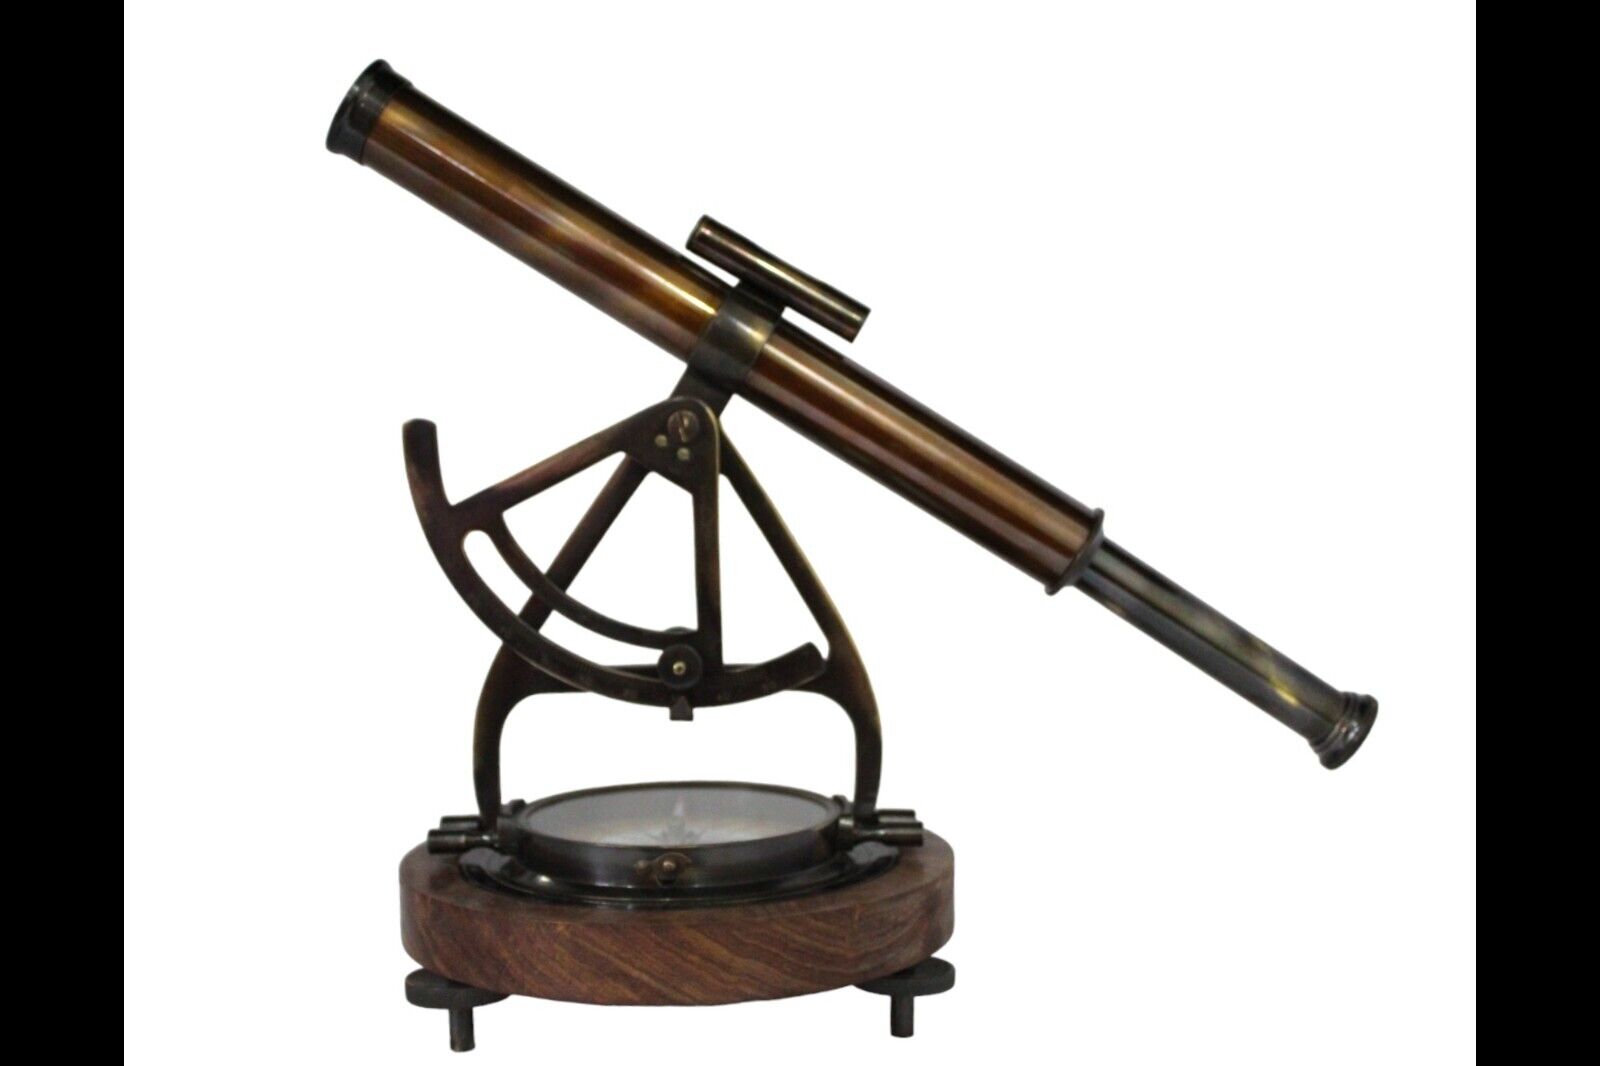 Antique Telecope with Compass